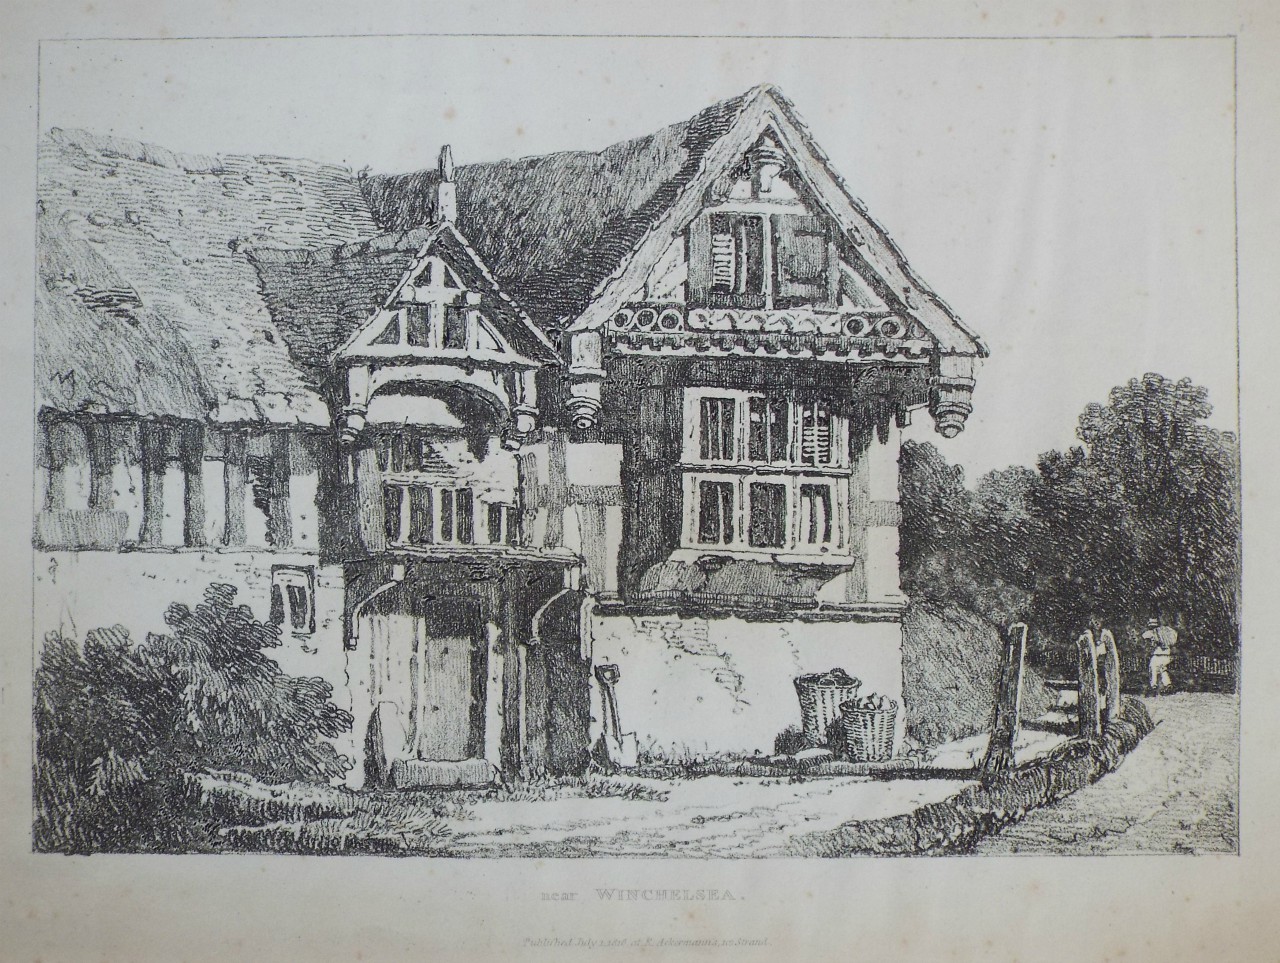 Soft-ground Etching - Near Winchelsea. - Prout